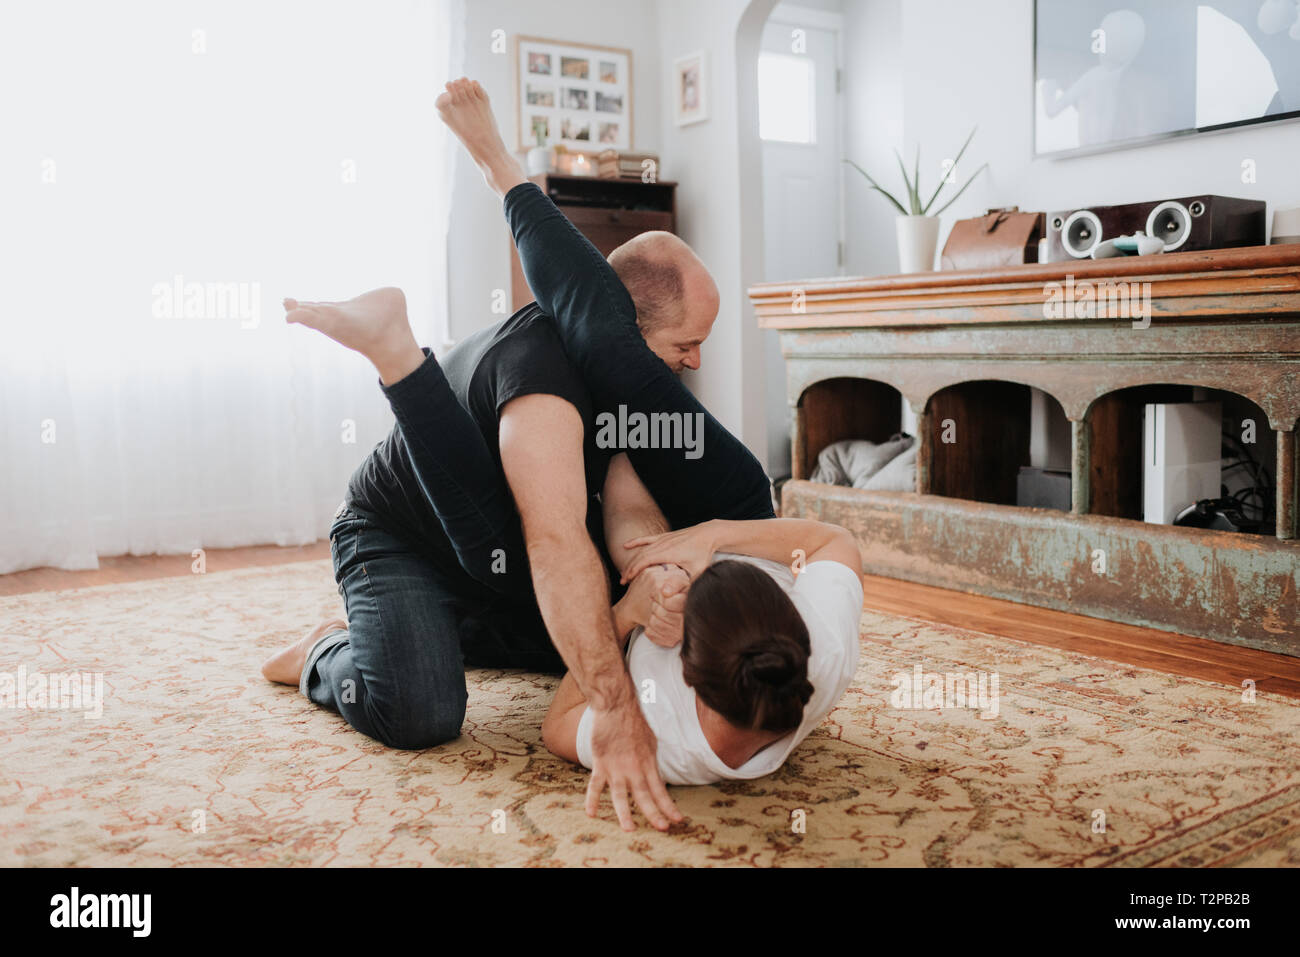 Couple wrestling on carpet at home Stock Photo